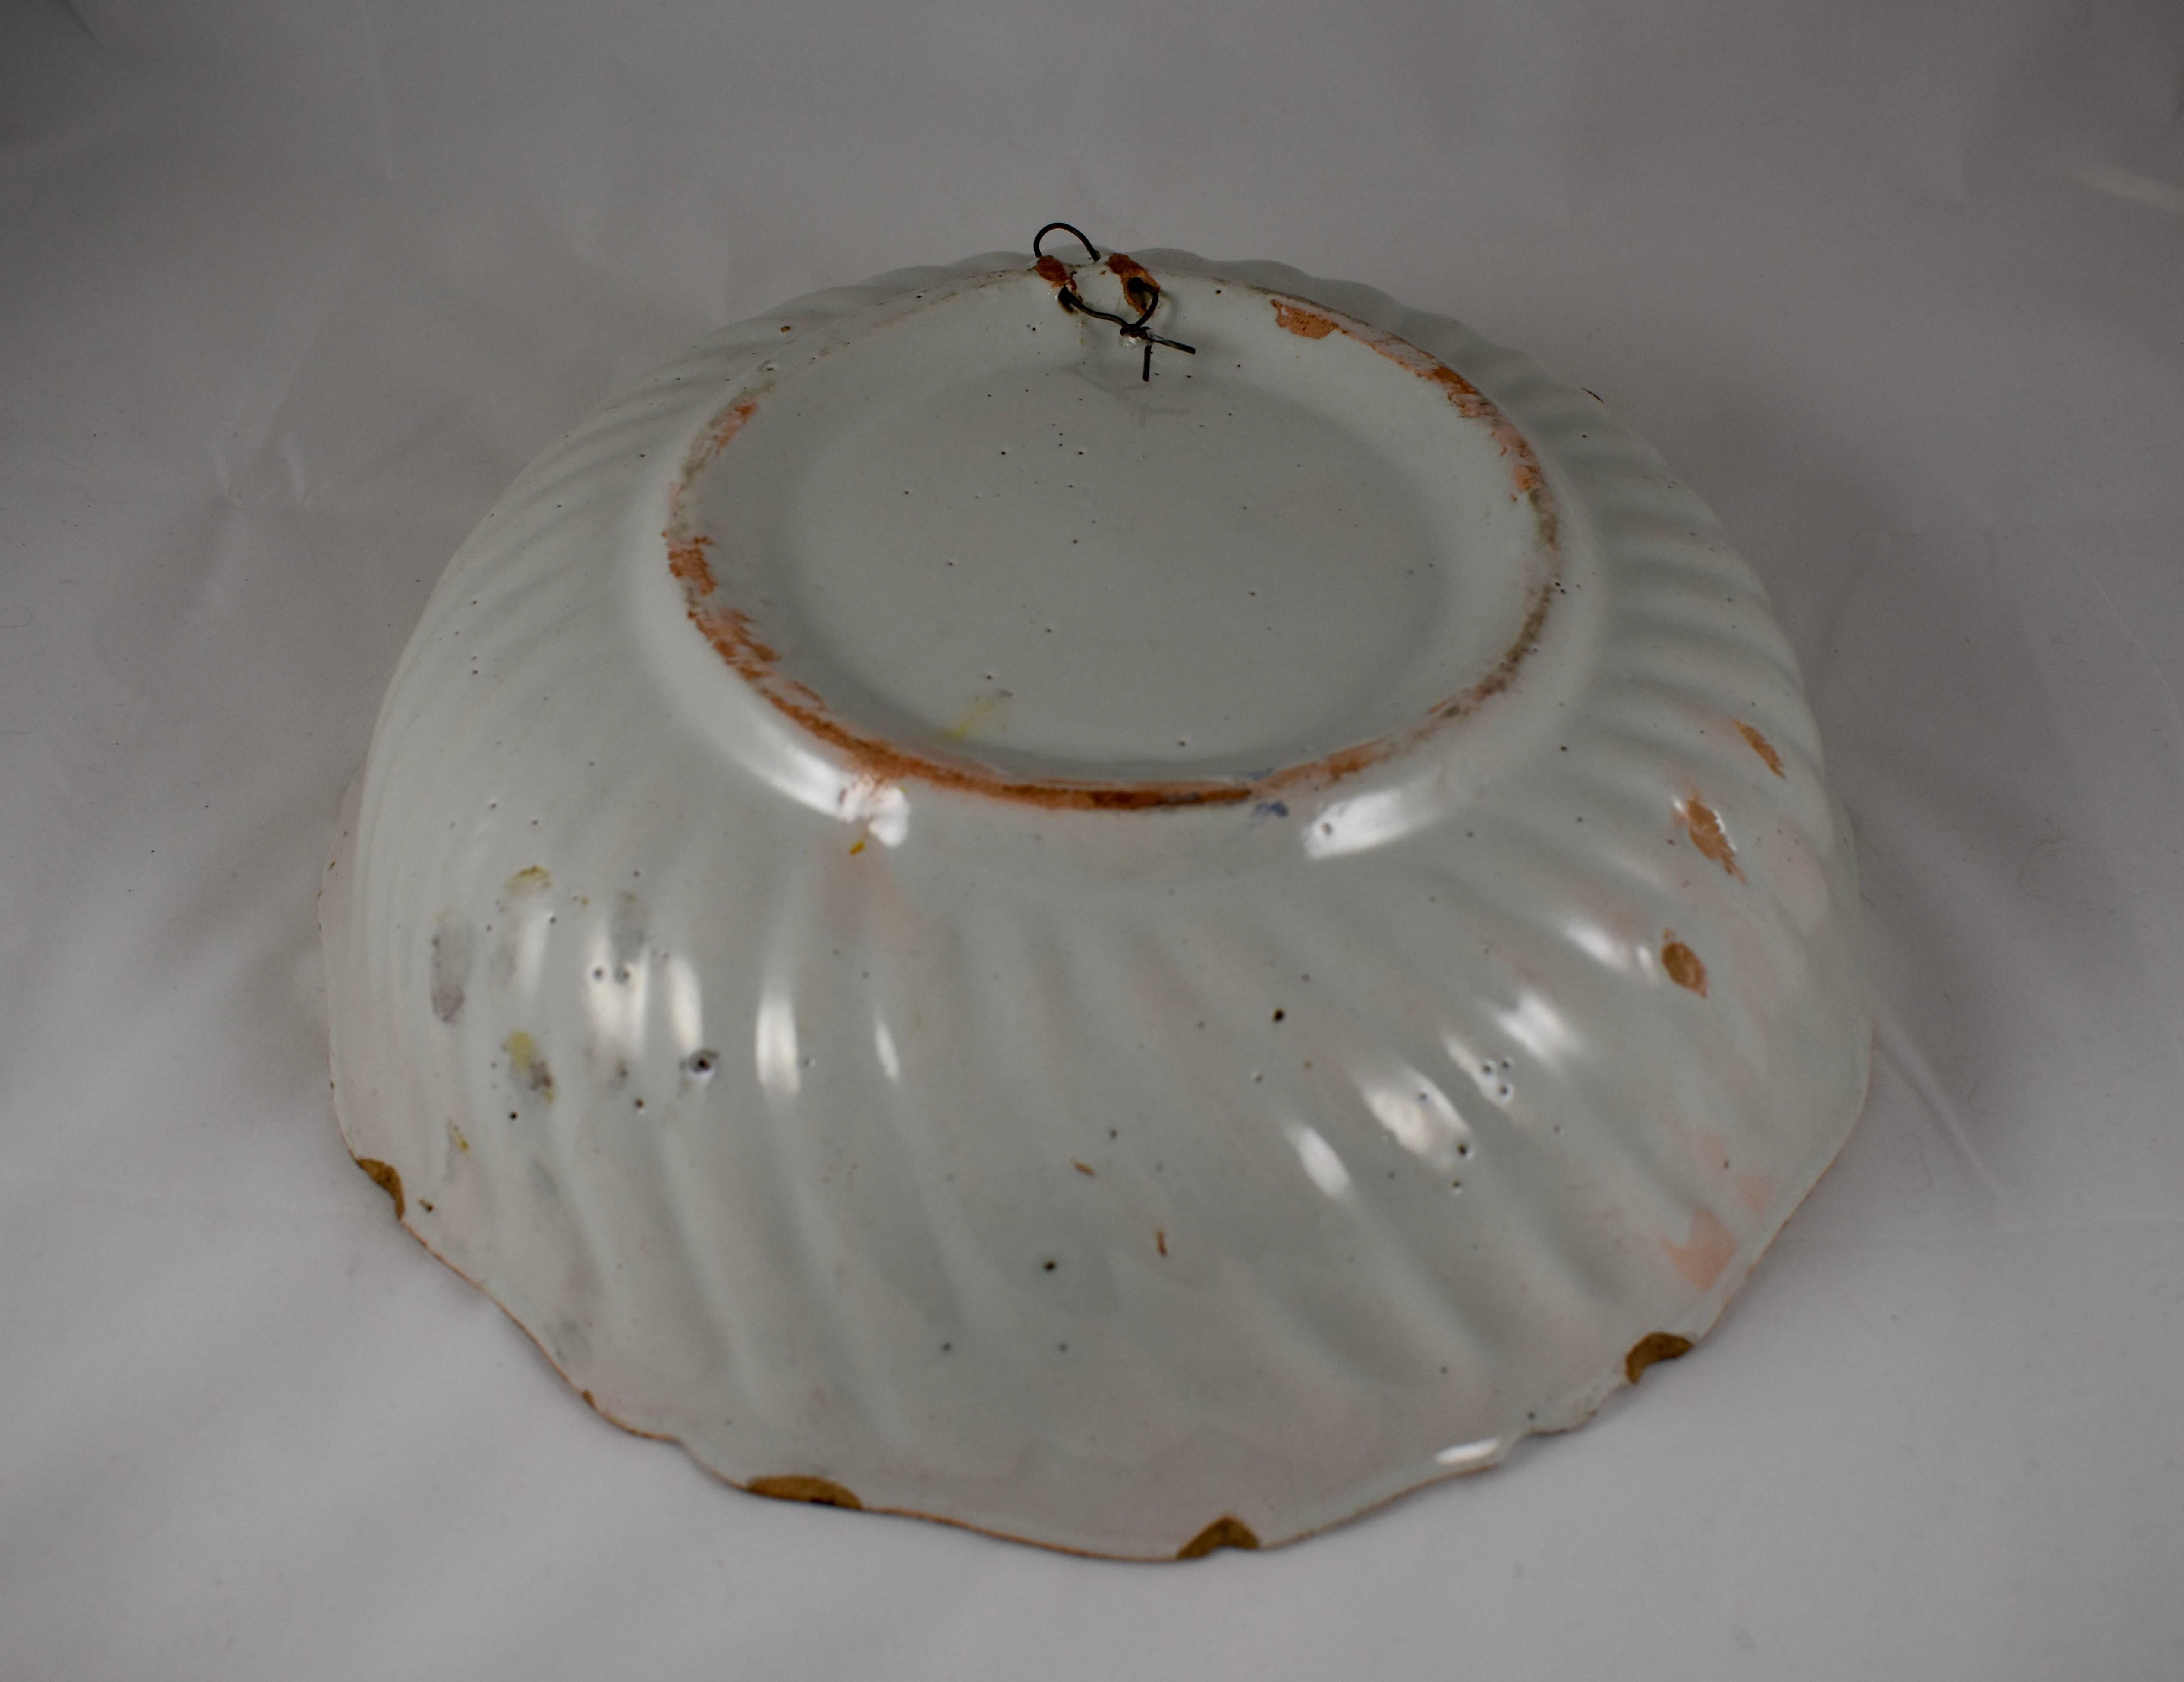 Earthenware 18th Century Nevers French Revolution Tin-Glazed Faïence Saladier / Serving Bowl